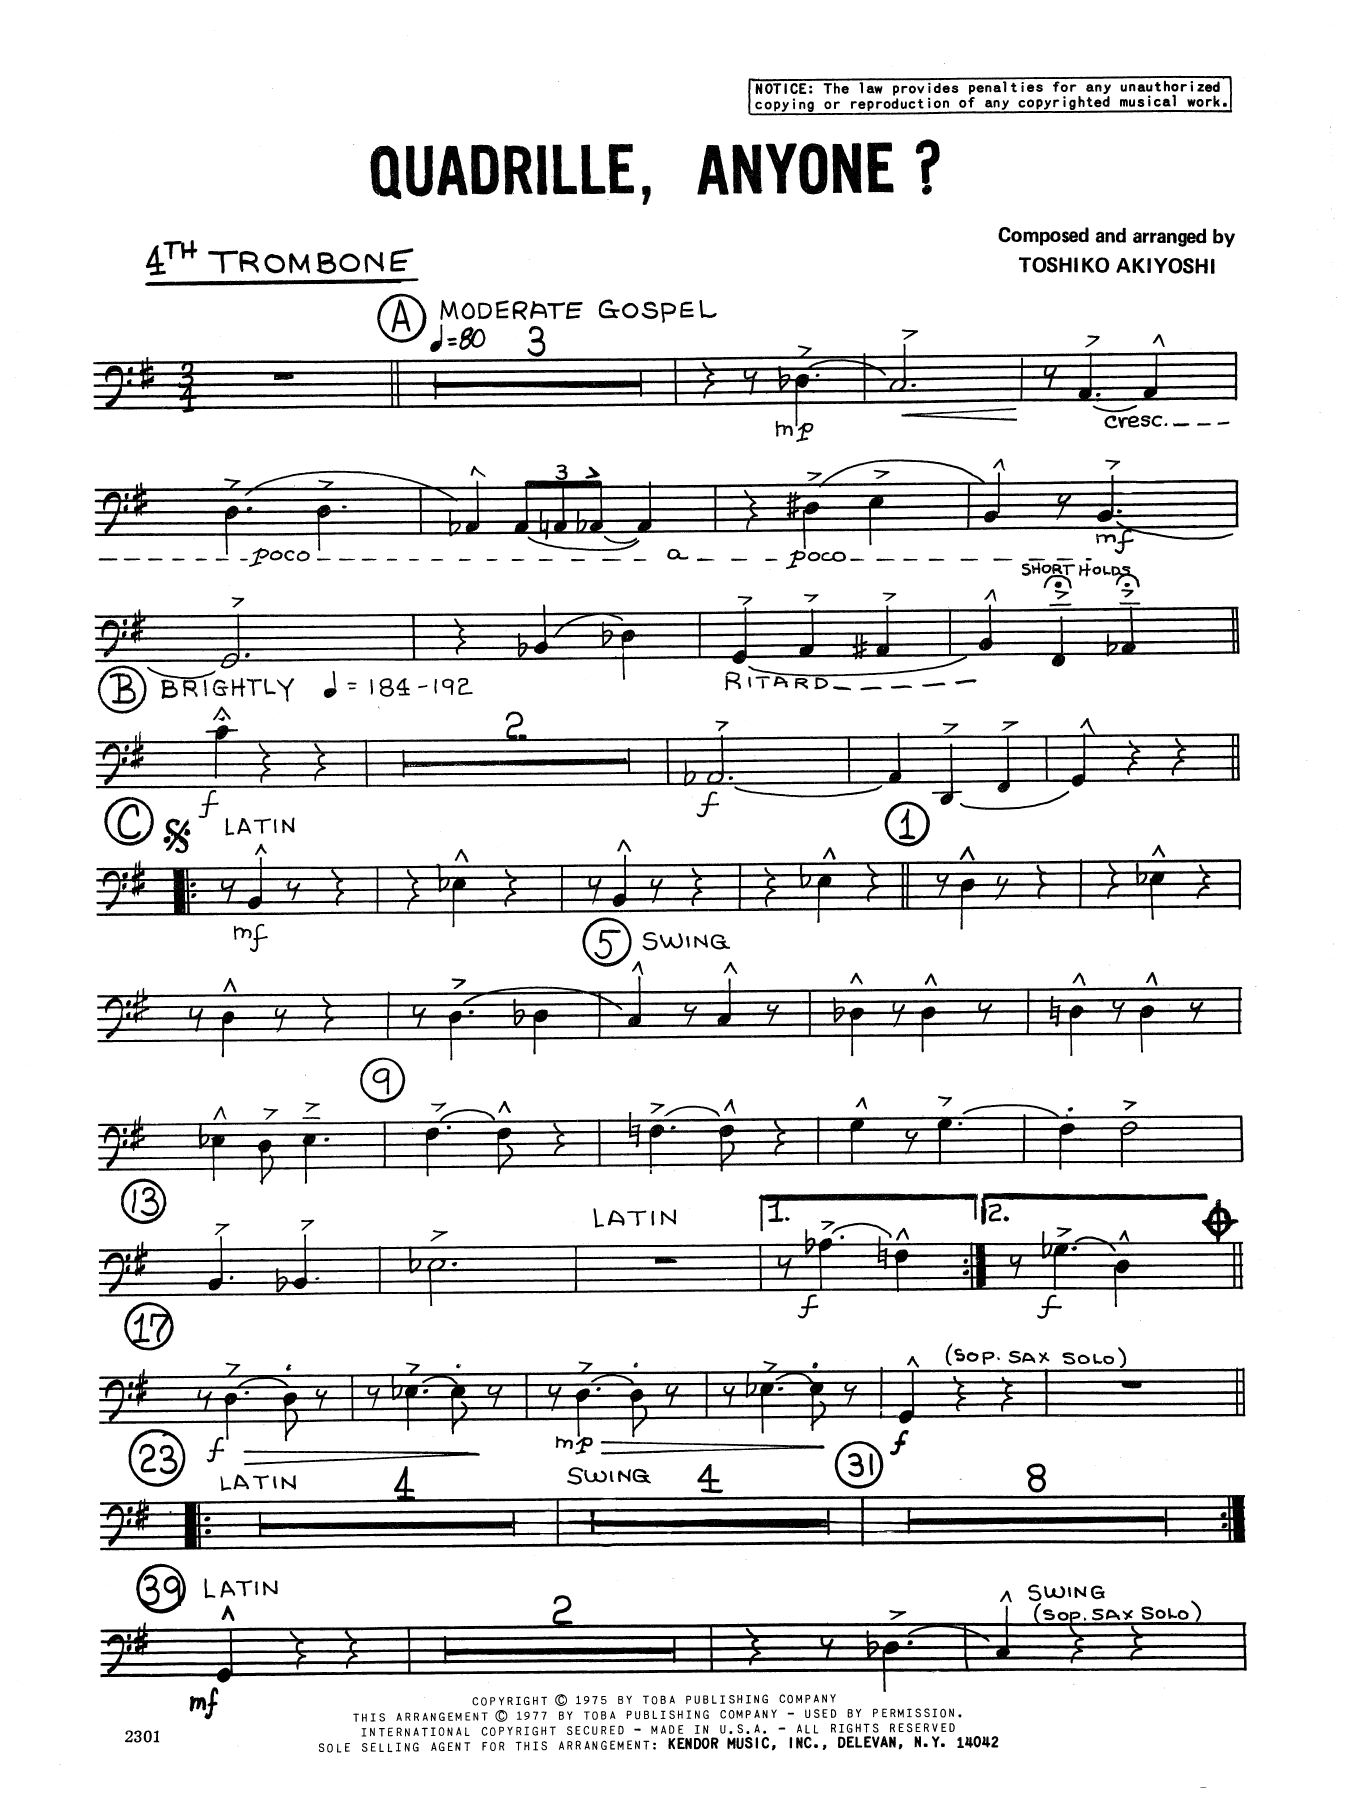 Toshiko Akiyoshi Quadrille, Anyone? - 4th Trombone sheet music preview music notes and score for Jazz Ensemble including 2 page(s)